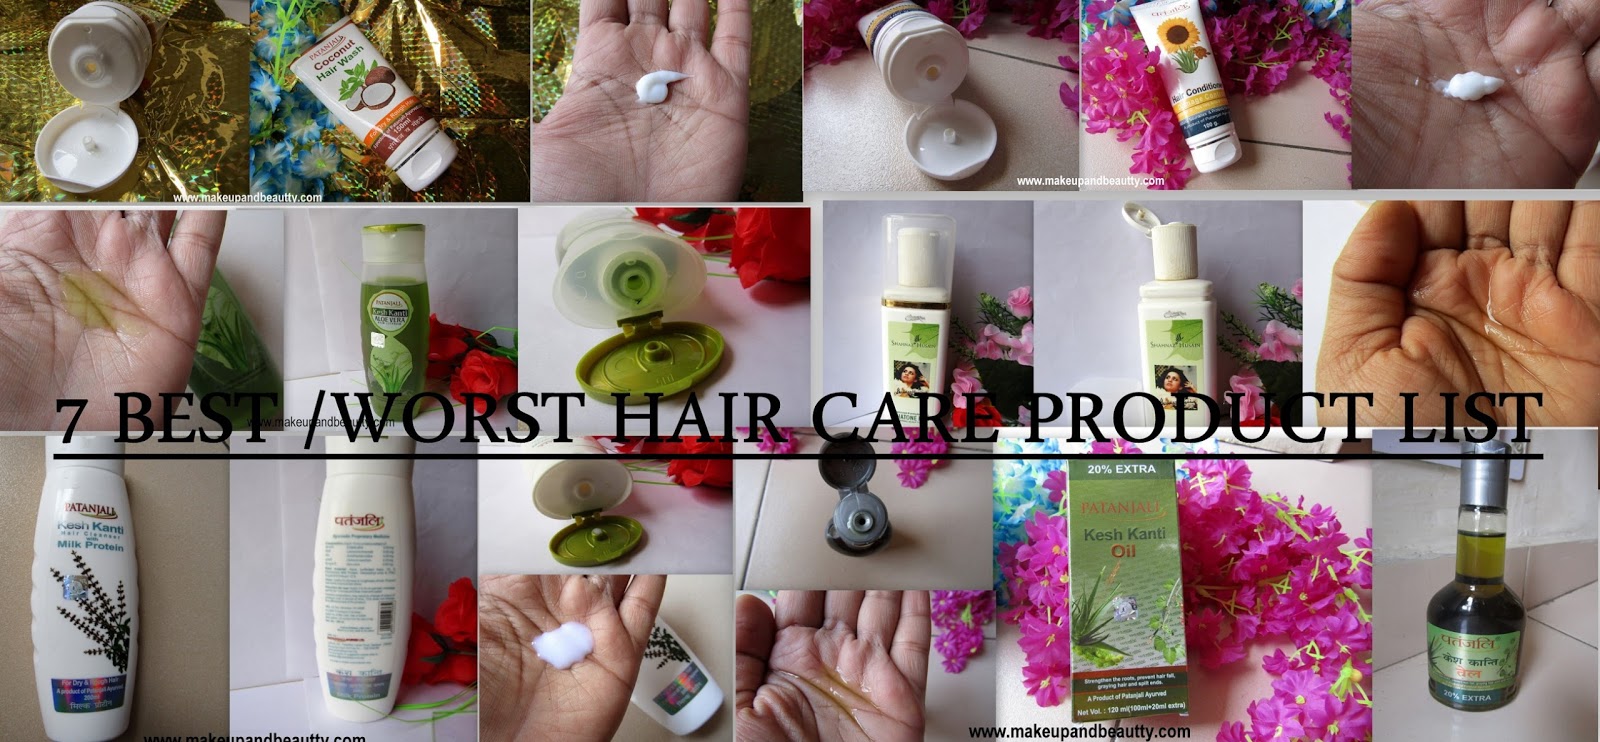 Top 76+ basic hair care products latest - in.eteachers